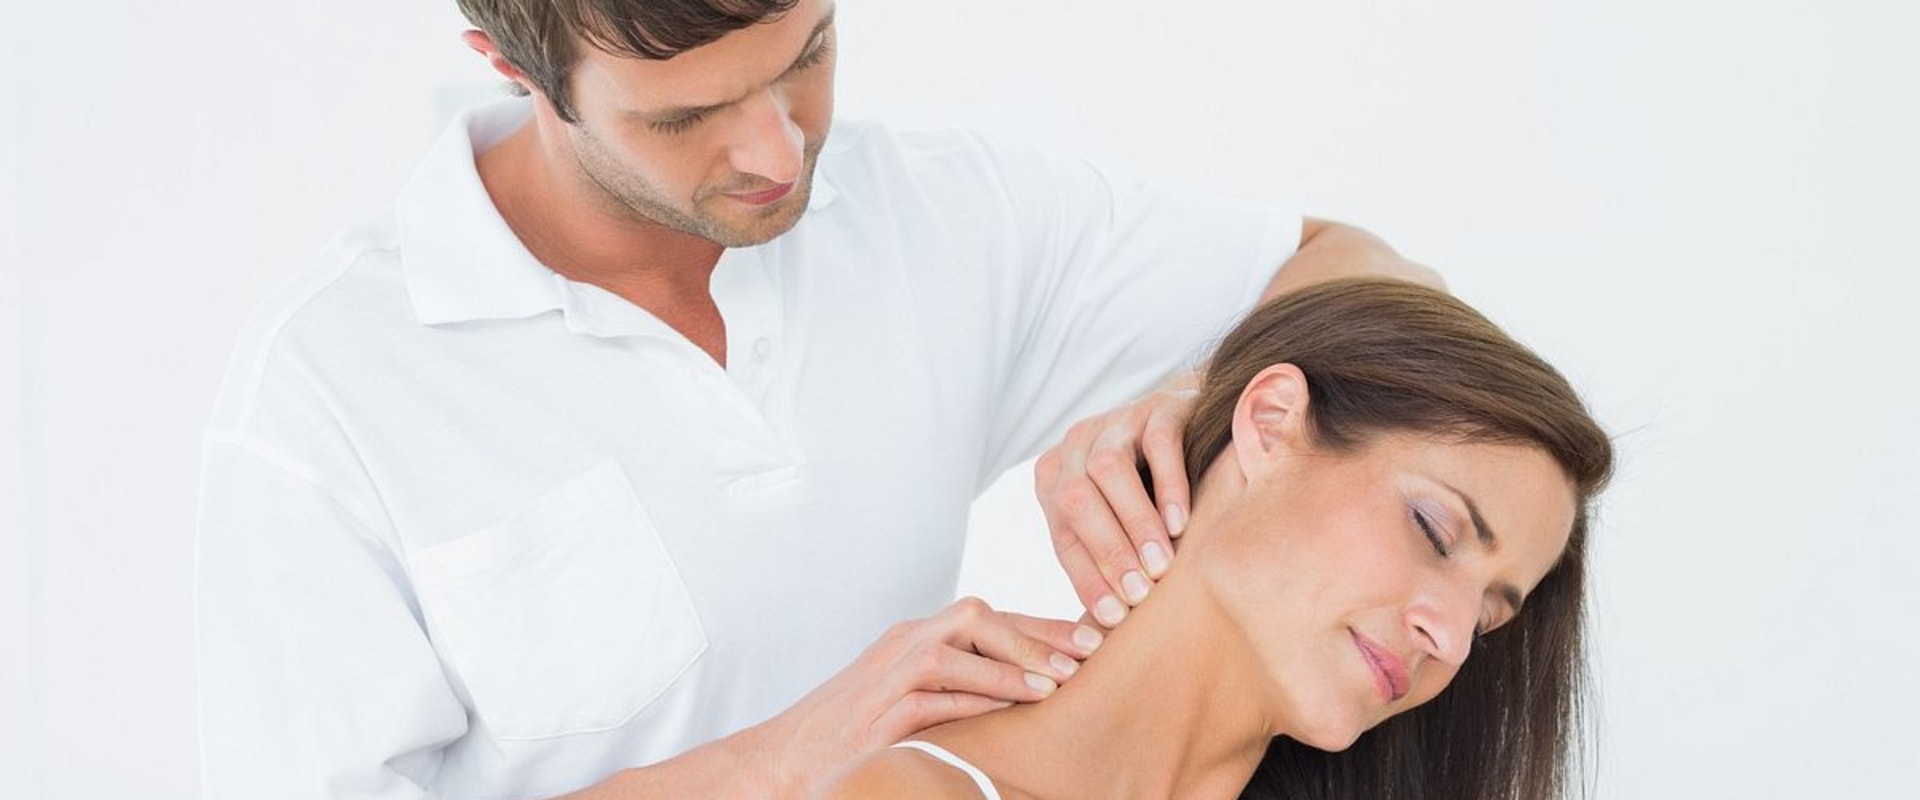 Can Massage Therapy Help Relieve Back and Neck Pain?